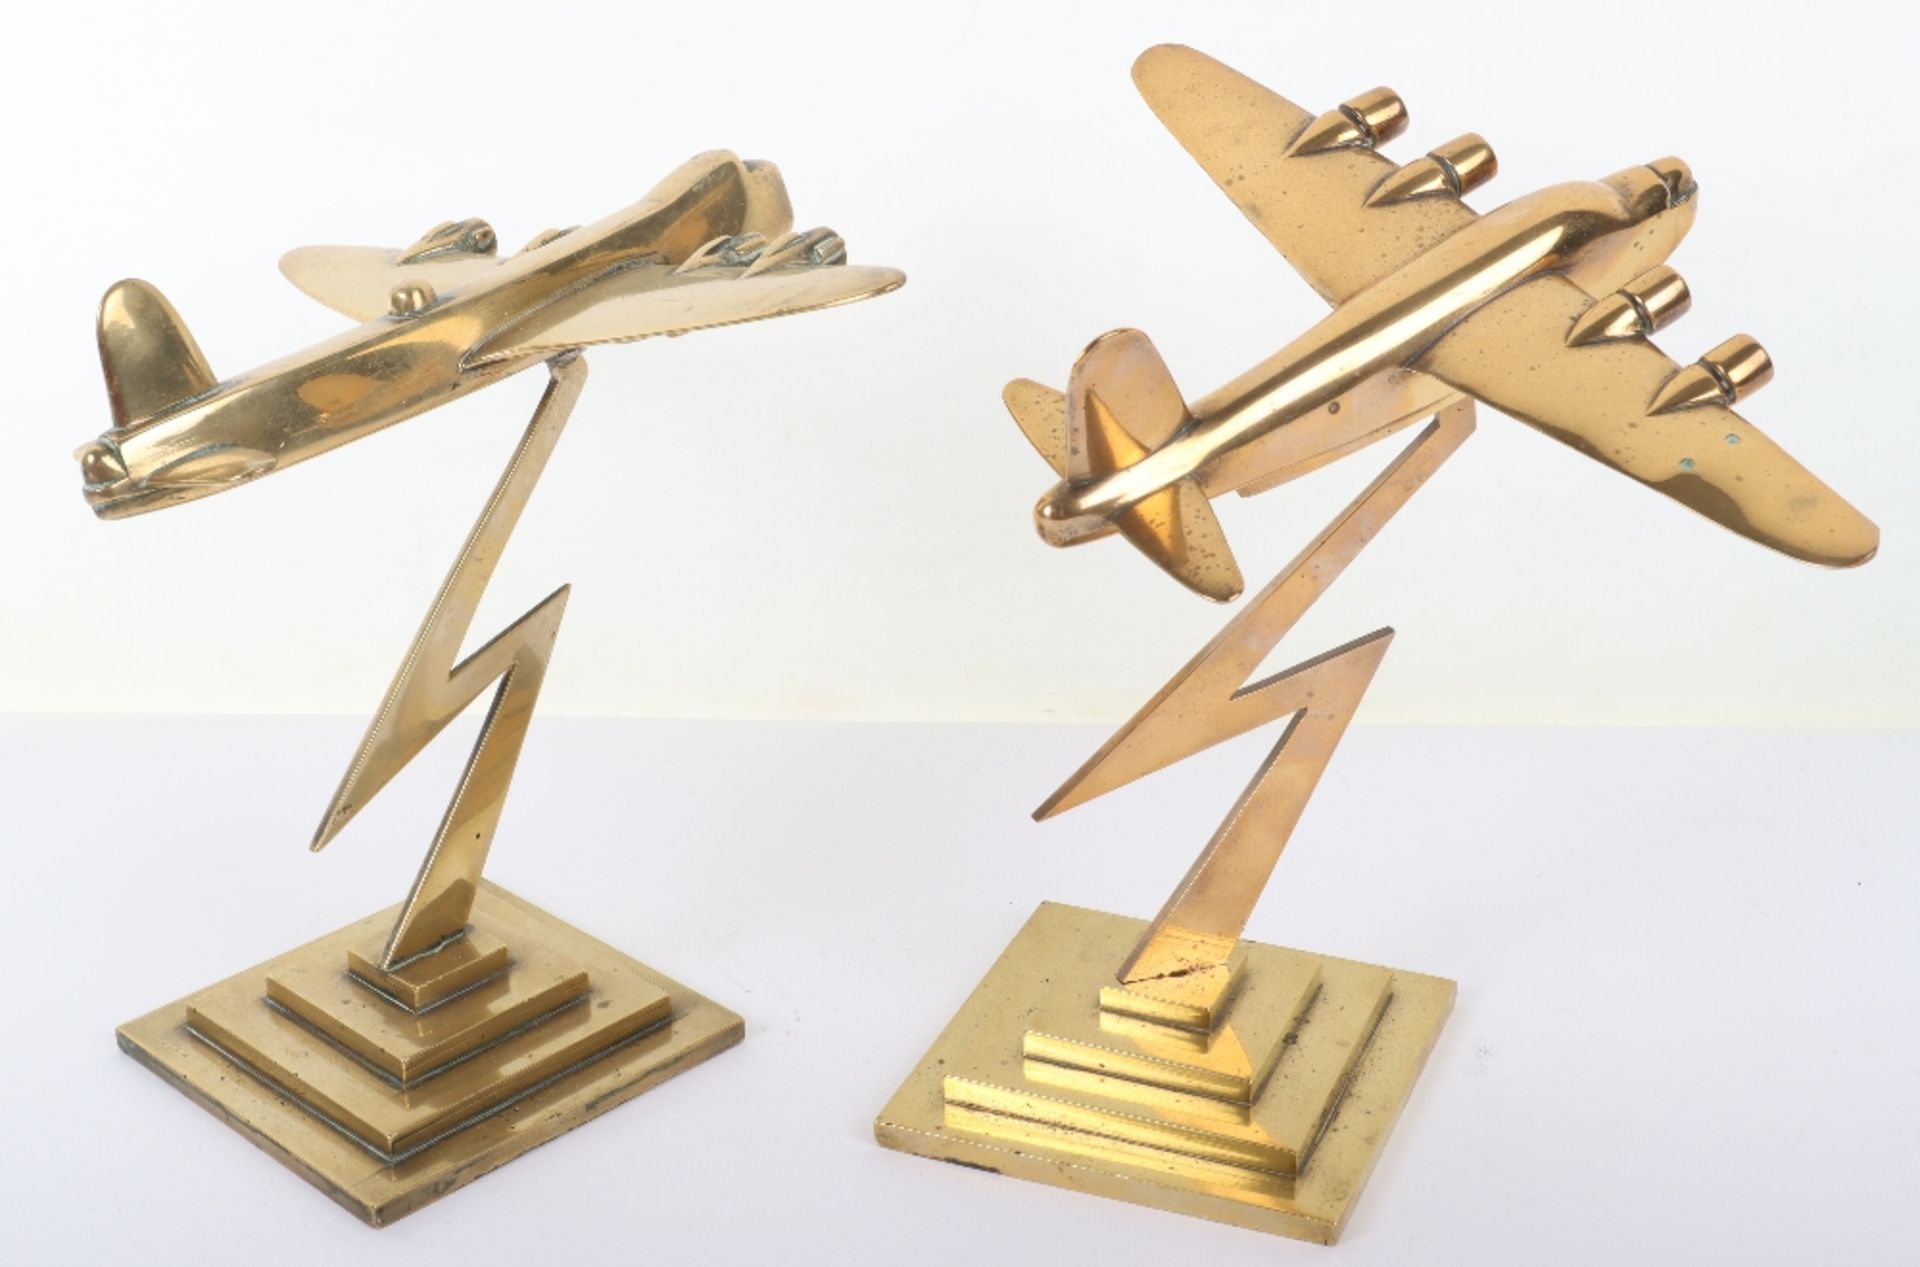 2x Heavy Brass Desk Models of WW2 Four Engine Bomber Aircraft - Image 2 of 5